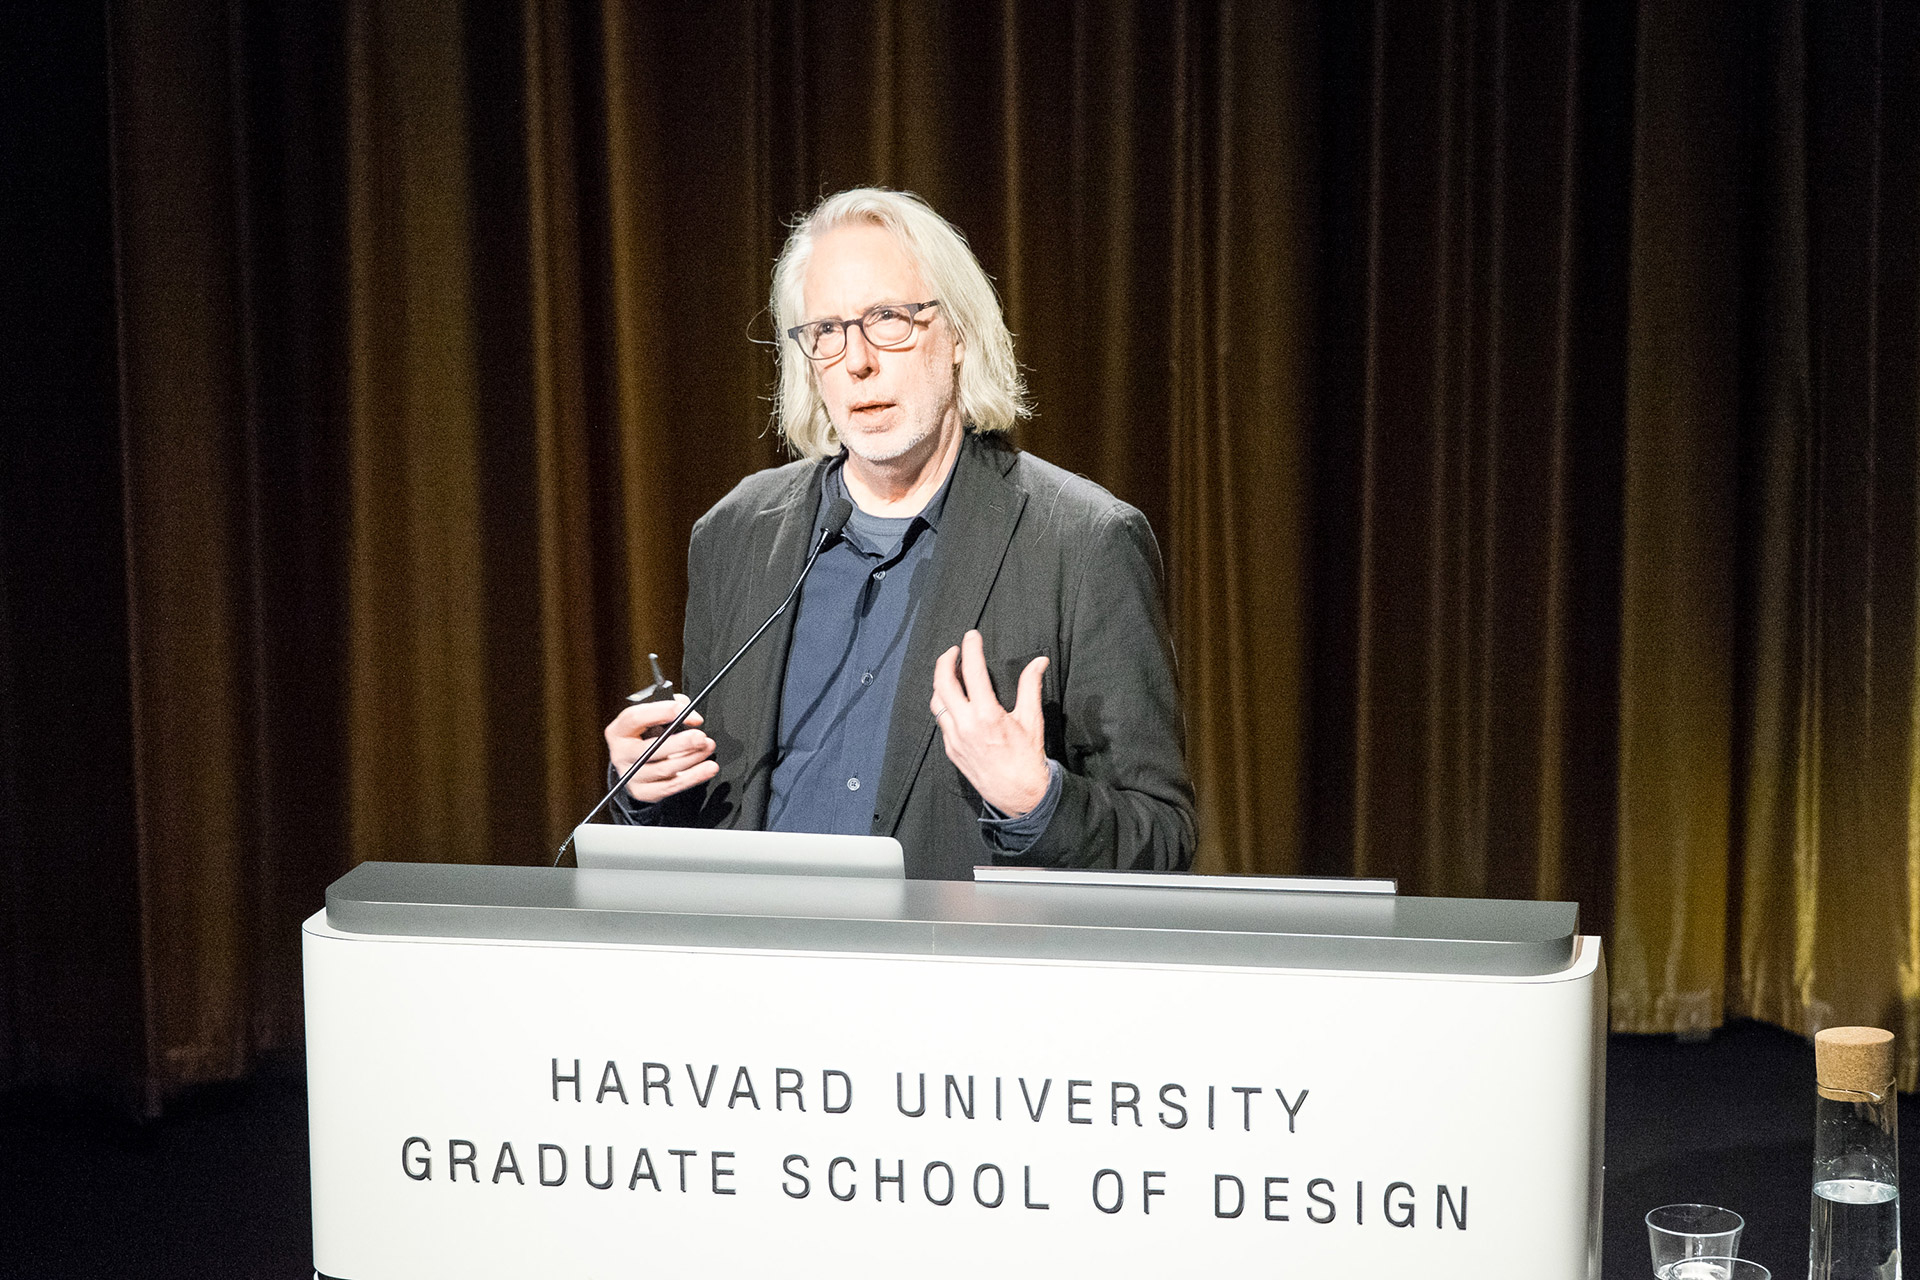 Rouse Visiting Artist Lecture: James Welling, “Pathological Color” 2